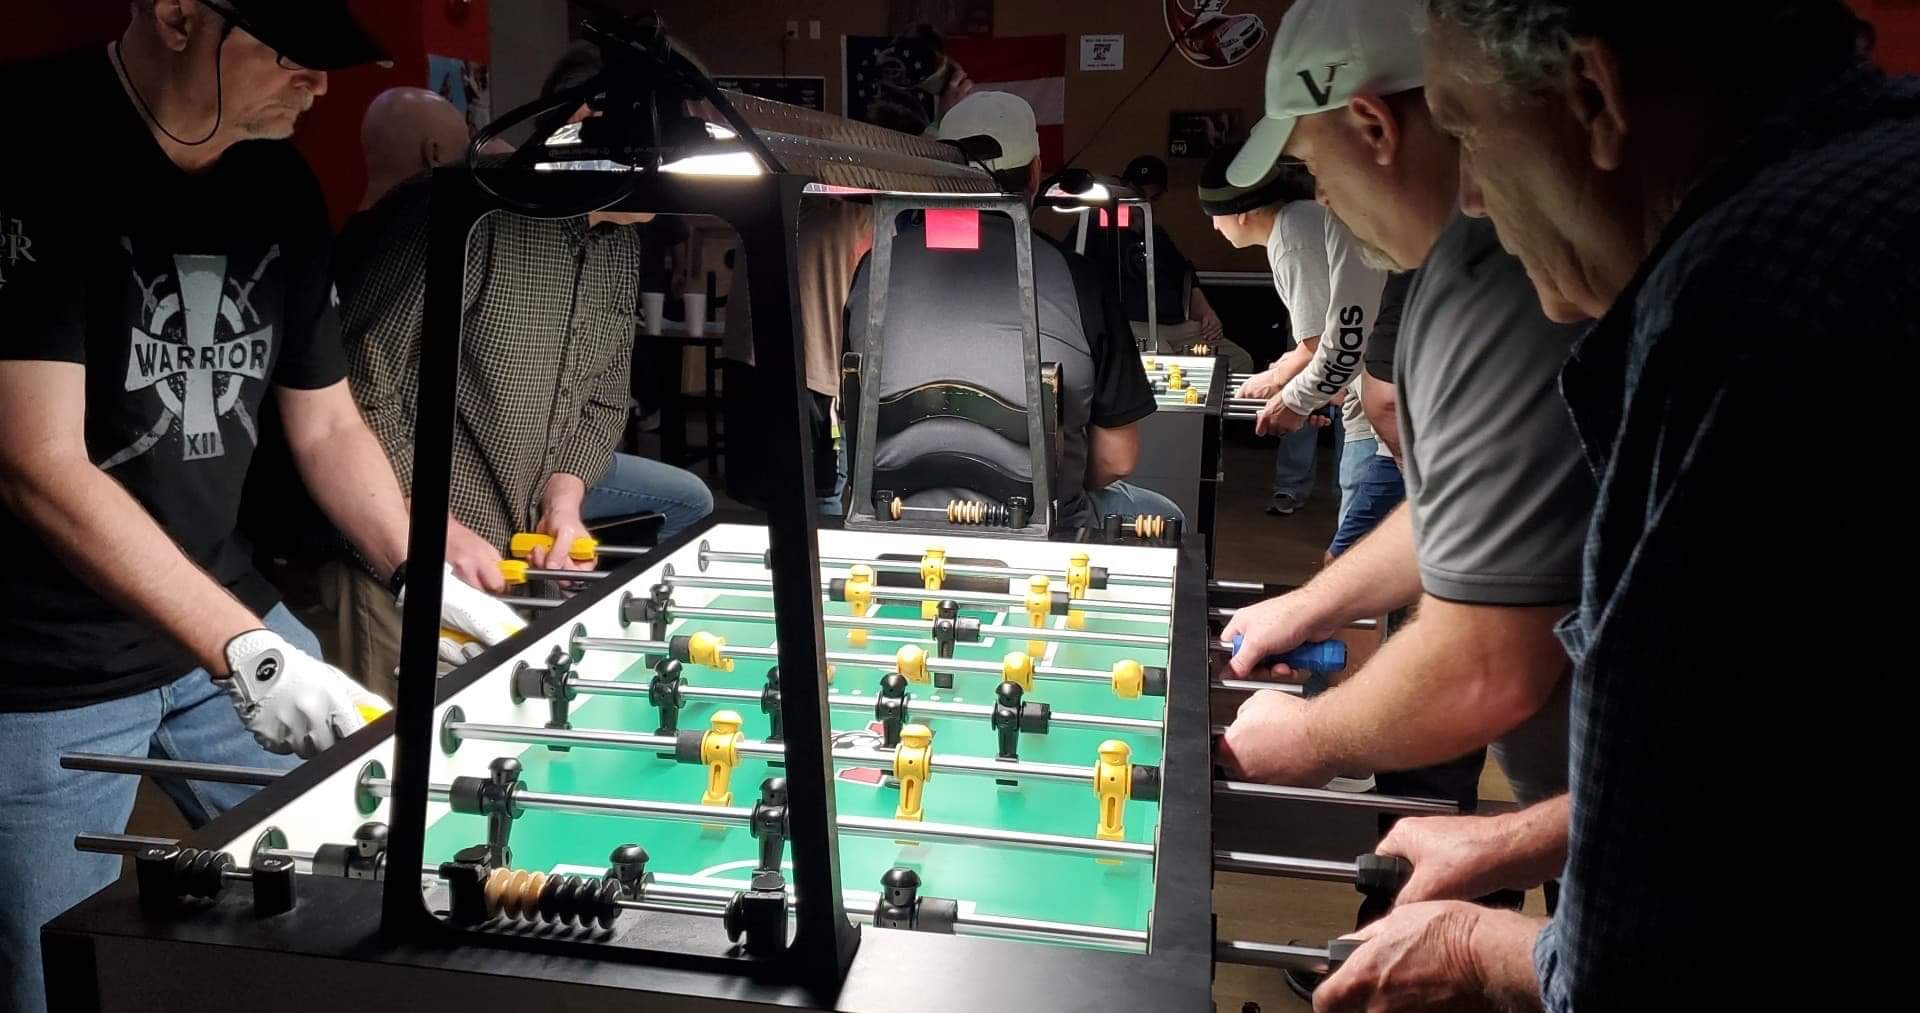 Alexander City,AL. team, Steve Dodgen & Ken William are shown on the right during foosball competition in Douglasville,GA. Opponents are Rick Dell & Phil Grable, a couple top players also frequenting foosball action in that area this January 2021. 